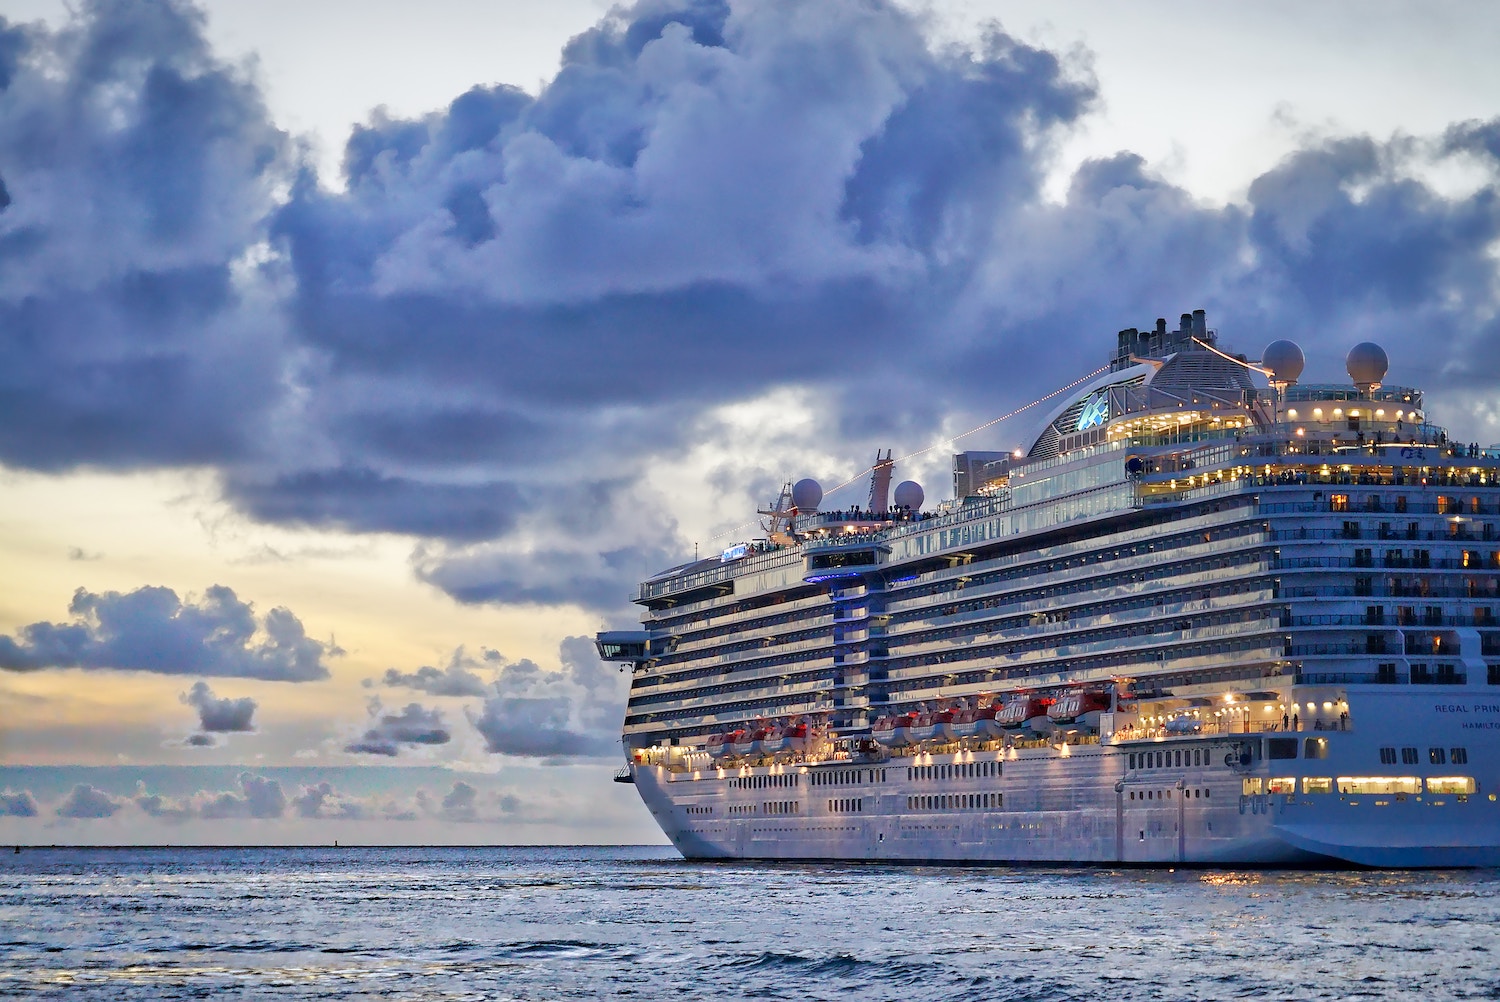 Cruises, Caribbean cruise, prime day day travel deals, Book a Cruise and Save up to 40%, Save up to 30% and earn 10 back with Avis, Get 50% off Rapid Rewards Points with Southwest, Save up to 15% on SIXT car rentals, Save 10% on Viator travel experience, Rent the perfect car ad save